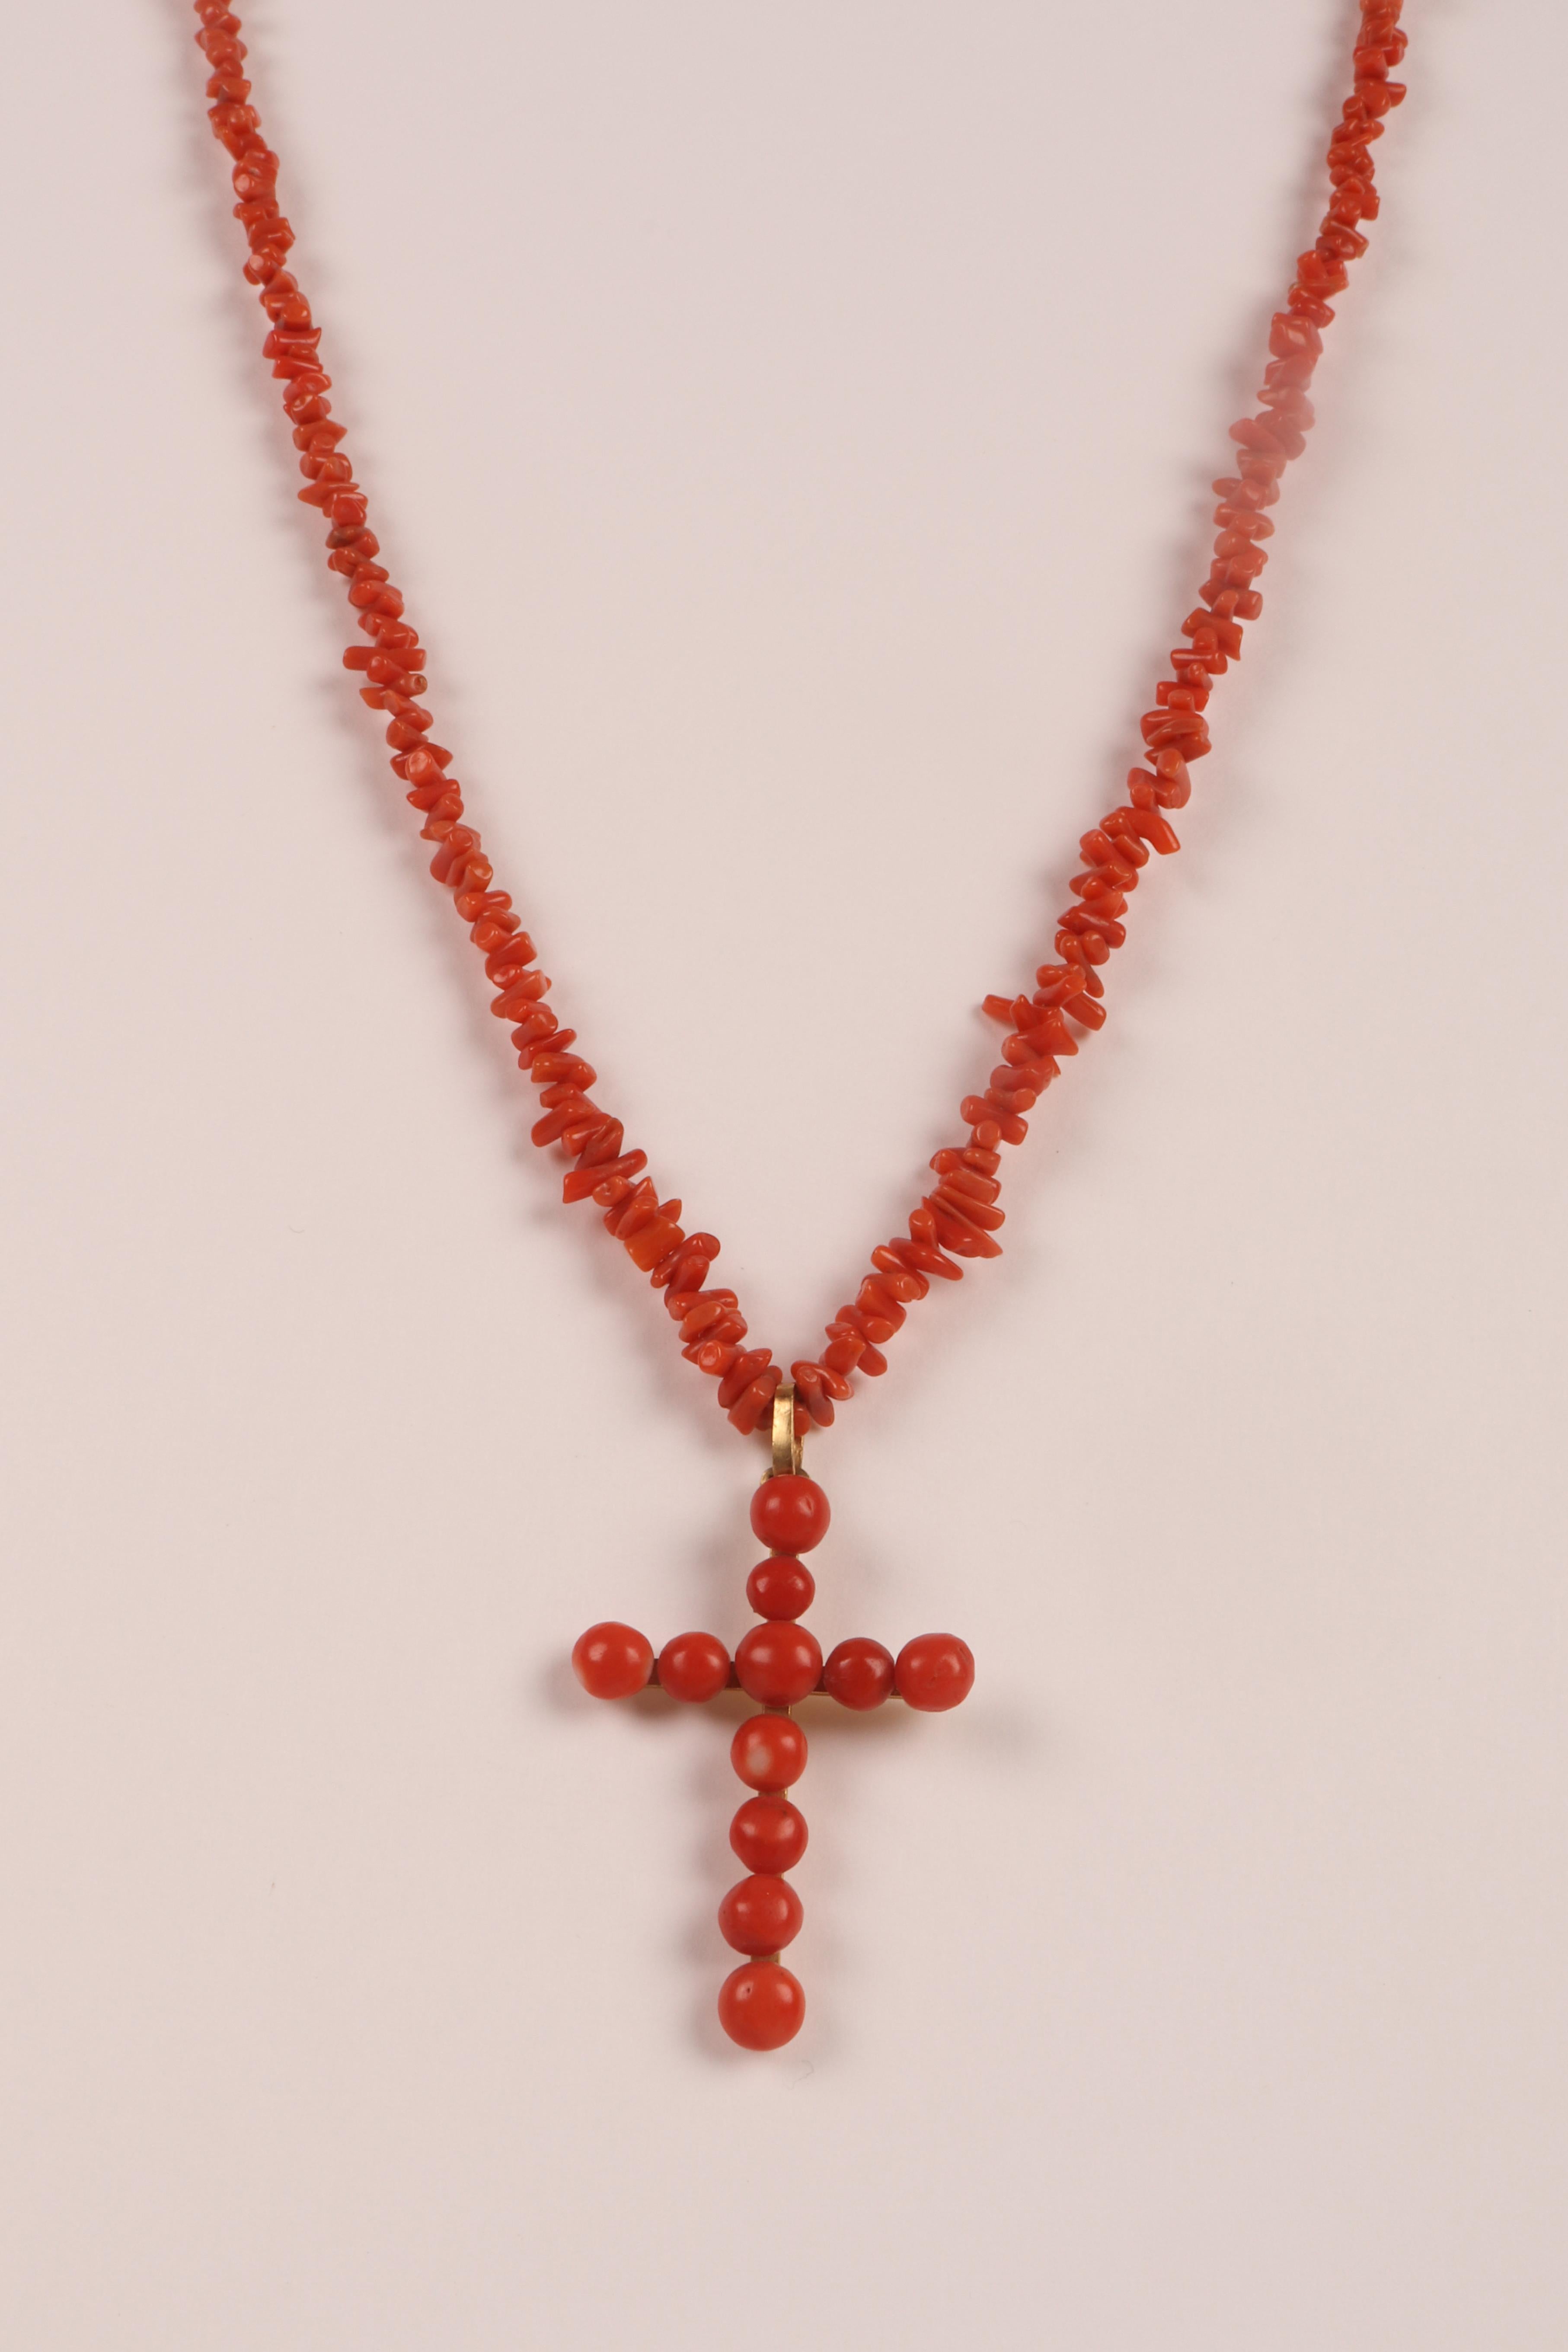 Gold Cross necklace. Mediterranean coral from Sciacca, England 1880. For Sale